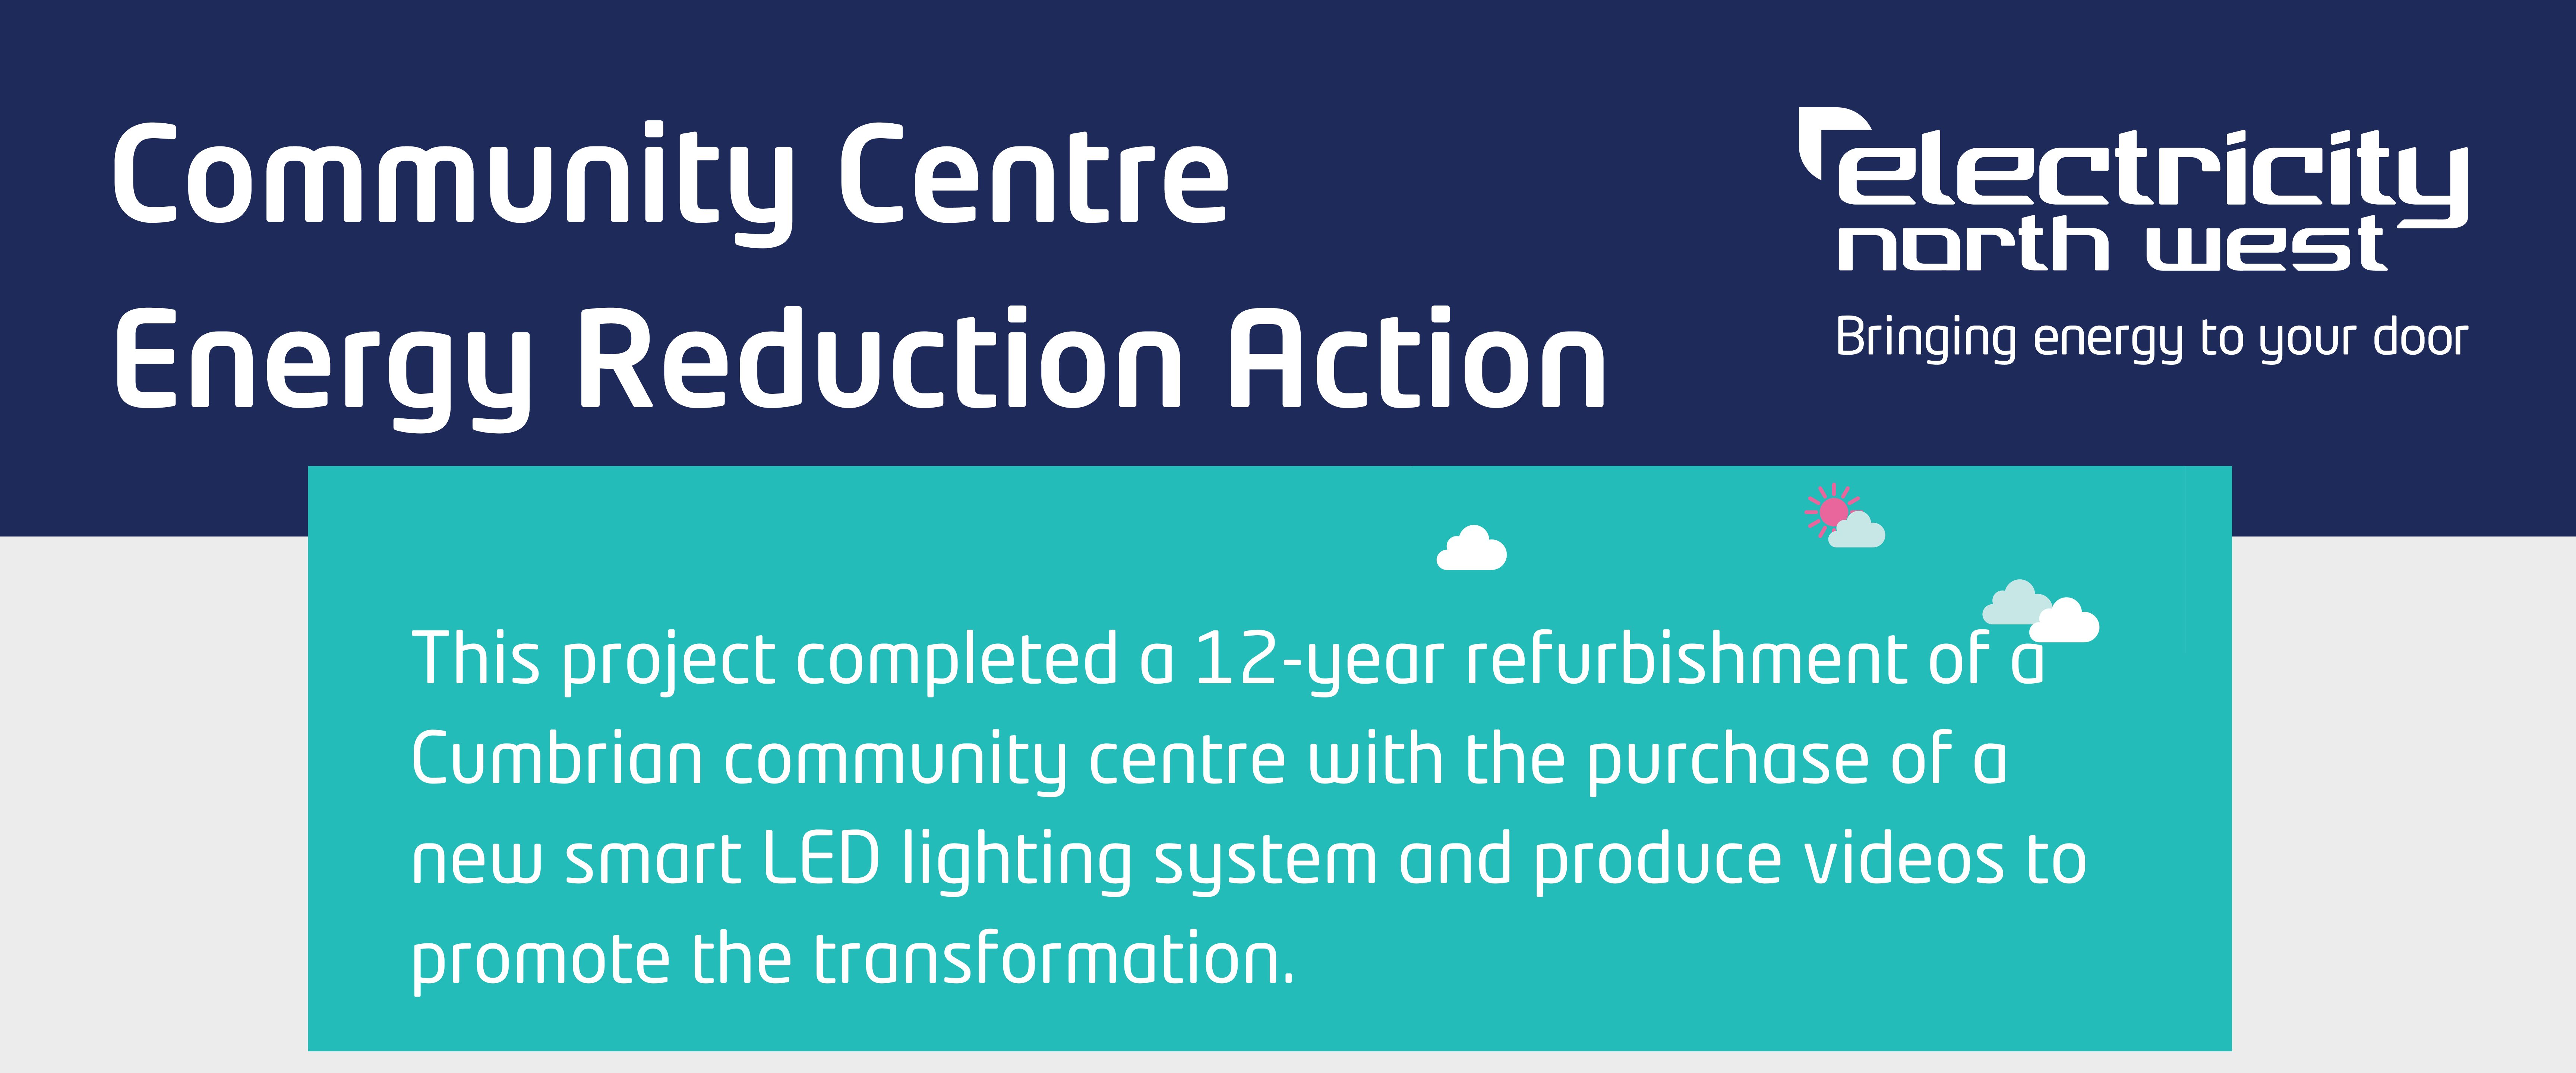 Community Centre Energy Reduction Action, This project completed a 12-year refurbishment of a Cumbrian community centre with the purchase of a new smart LED lighting system and produce videos to promote the transformation.  